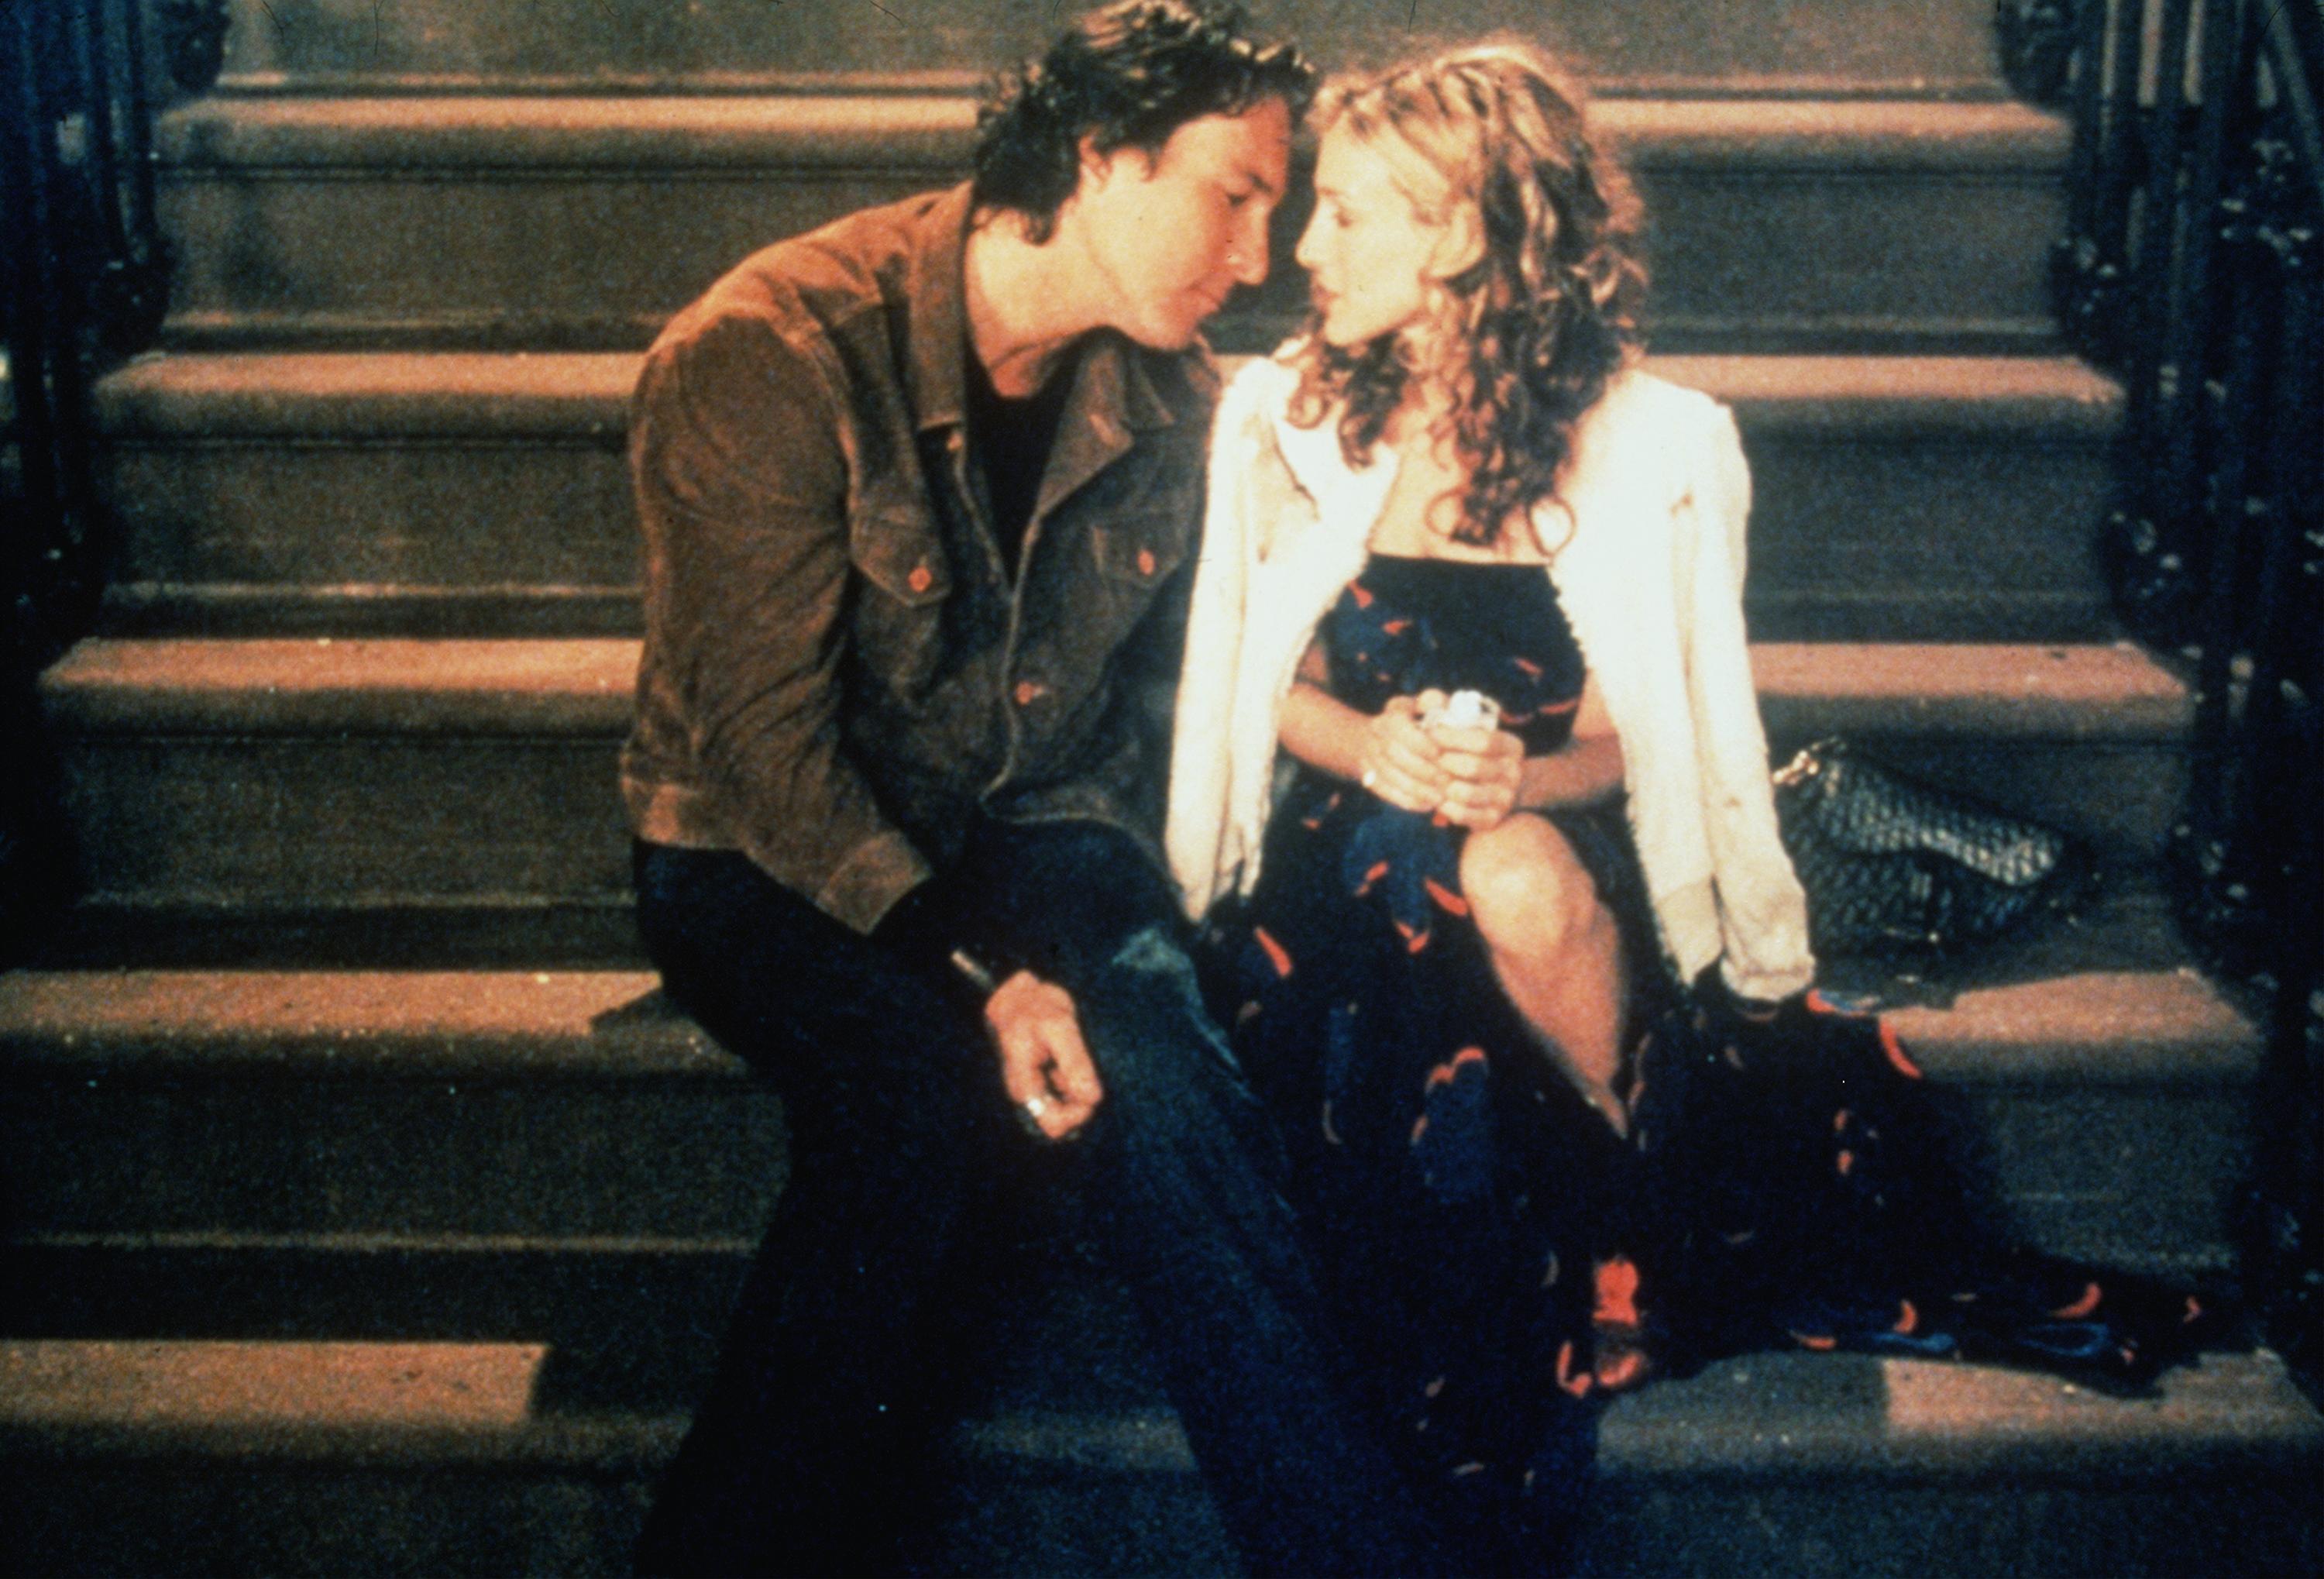 Sarah Jessica Parker as Carrie Bradshaw and John Corbett as Aidan Shaw sit on Carrie's front steps 